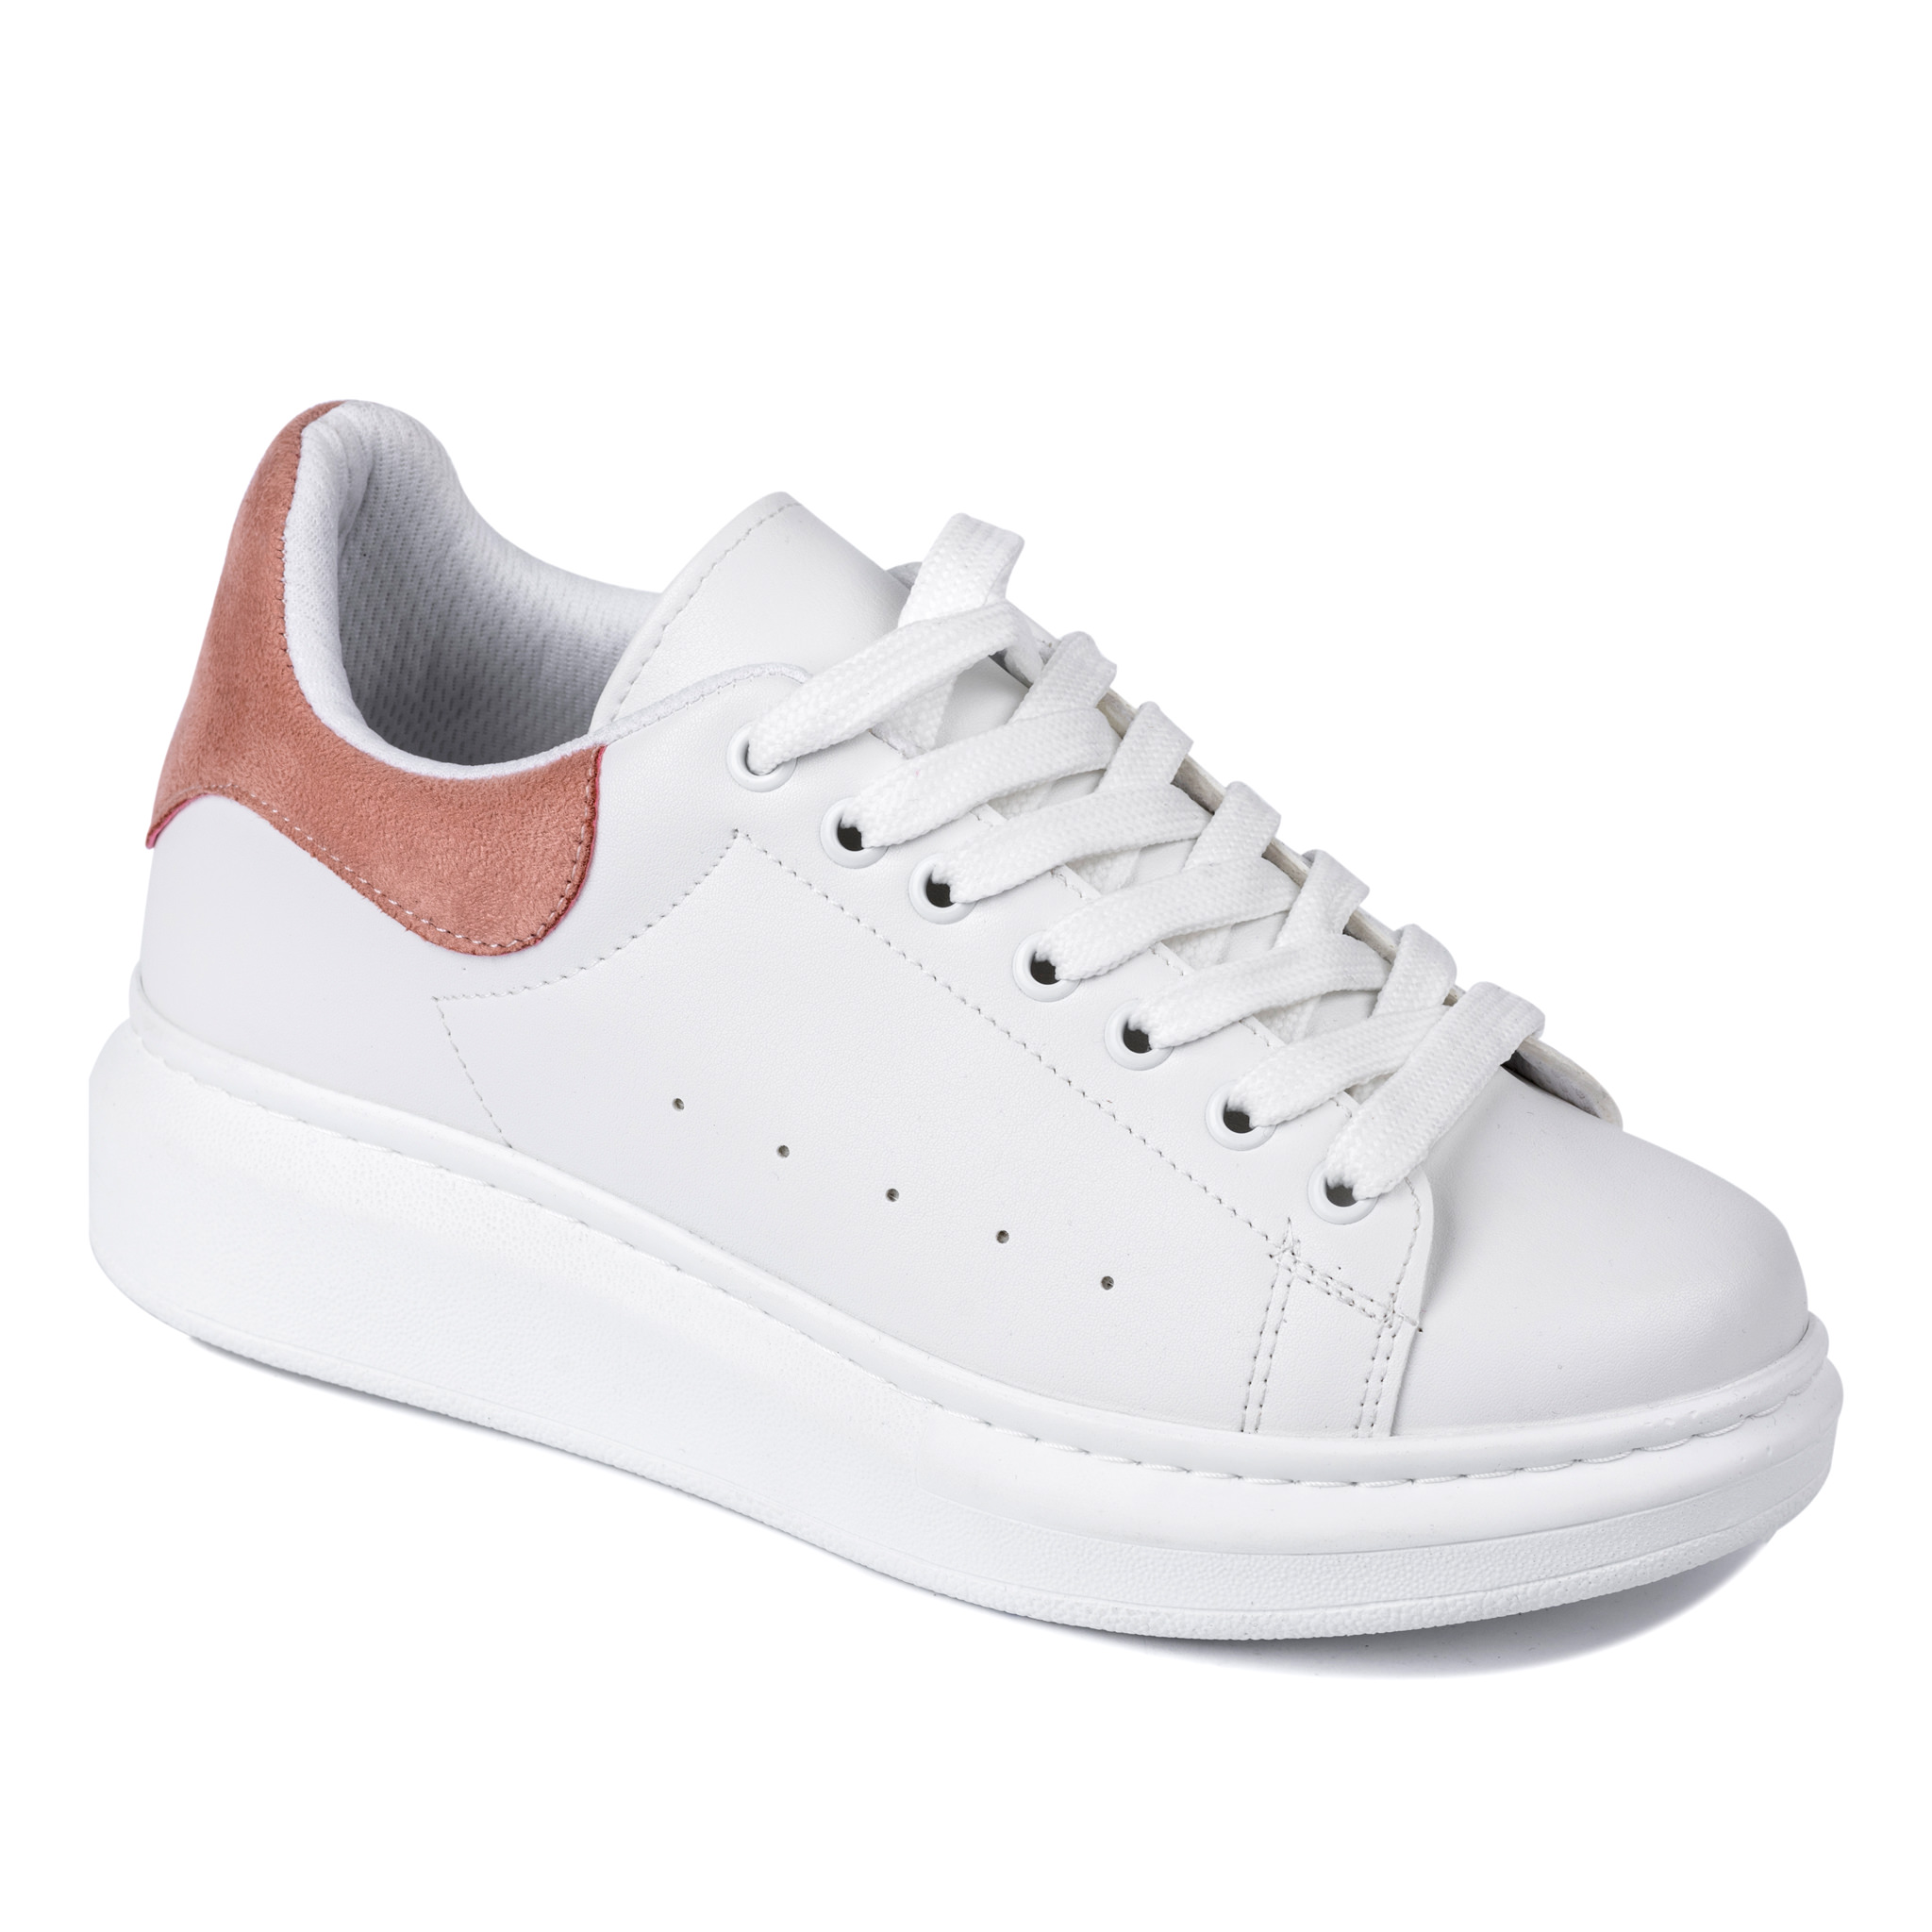 HIGH SOLE SNEAKERS - WHITE/ROSE